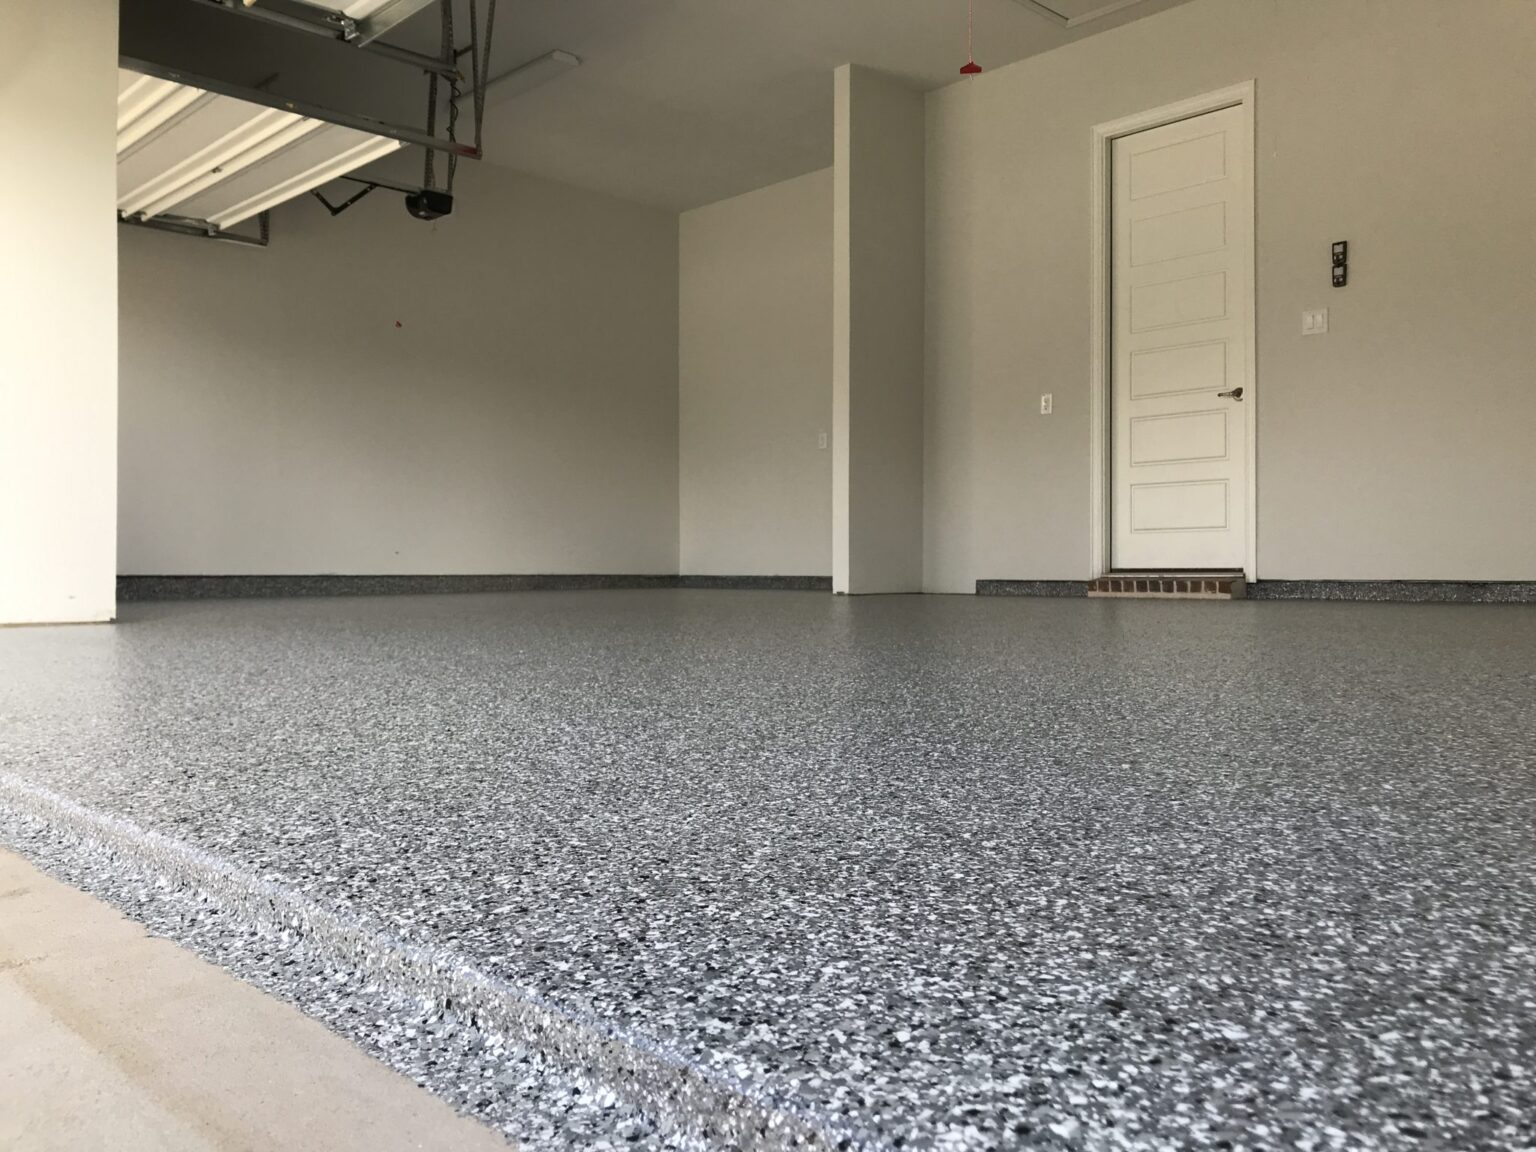 Garage with a floor coating in Southlake Texas